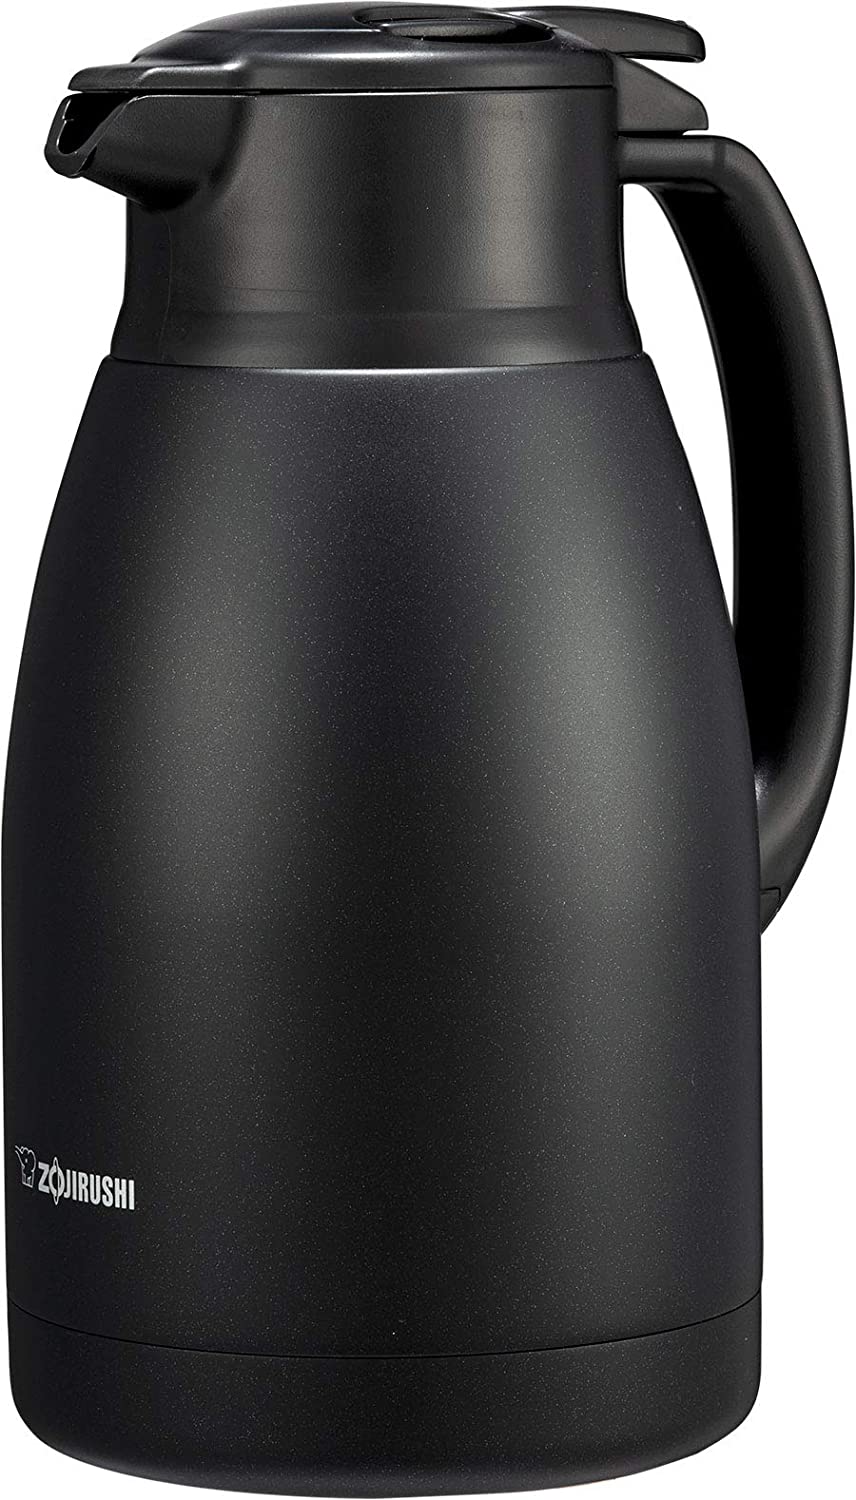 Zojirushi SH-HB15/SH-HC15 Stainless Steel Lined Vacuum Insulated Handy Pots 1.5L